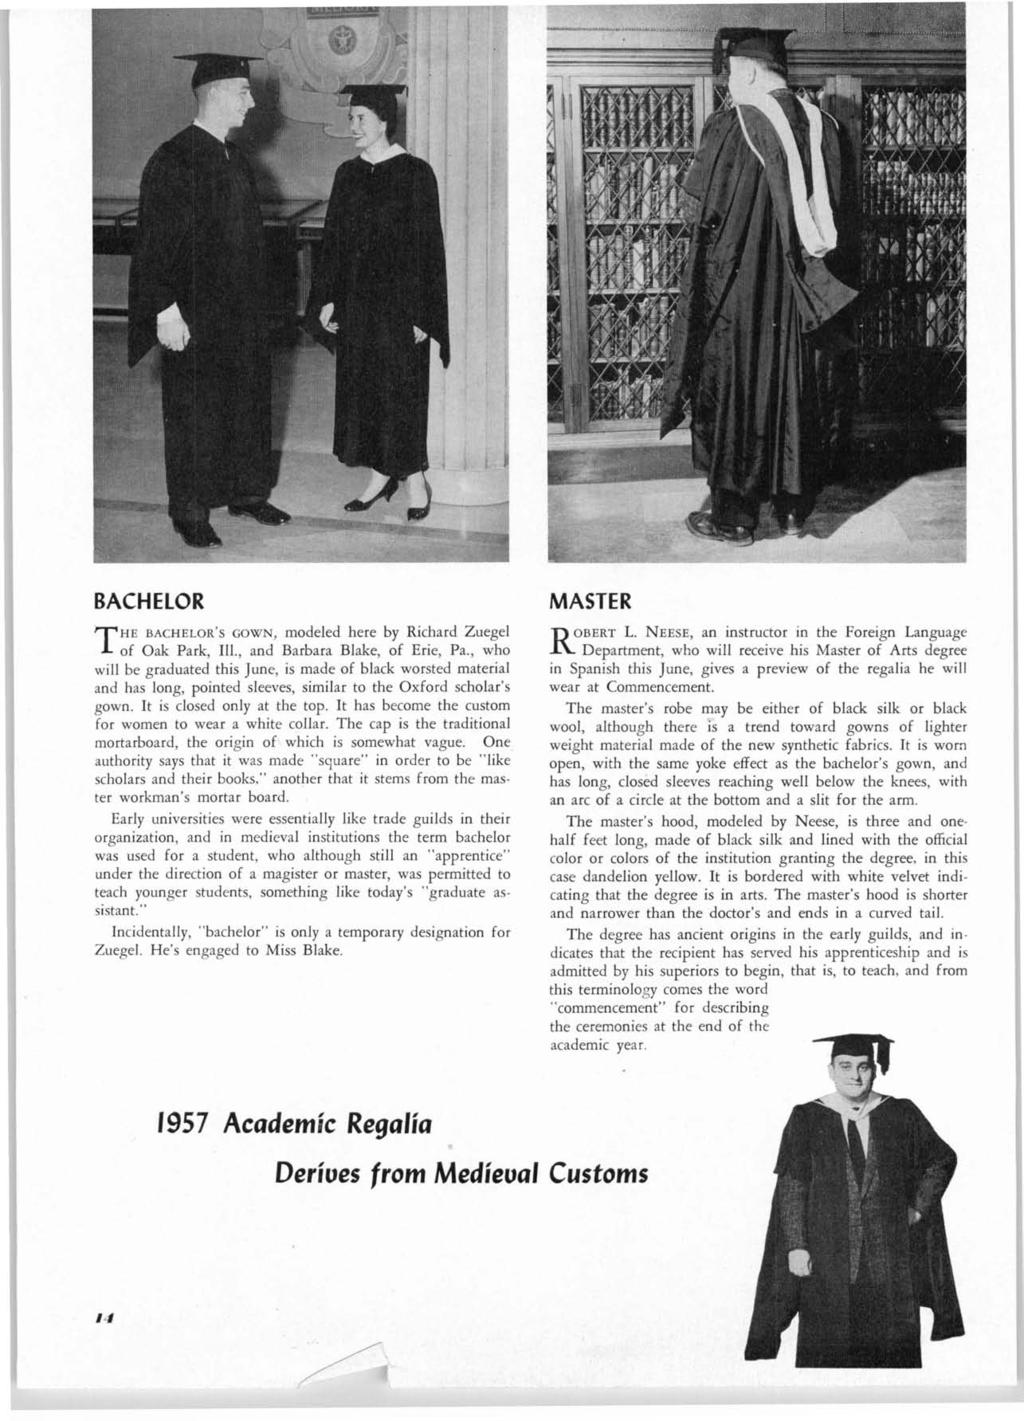 BACHELOR T HE BACHELOR'S GOWN I modeled here by Richard Zuegel of Oak Park, Ill., and Barbara Blake, of Erie, Pa.